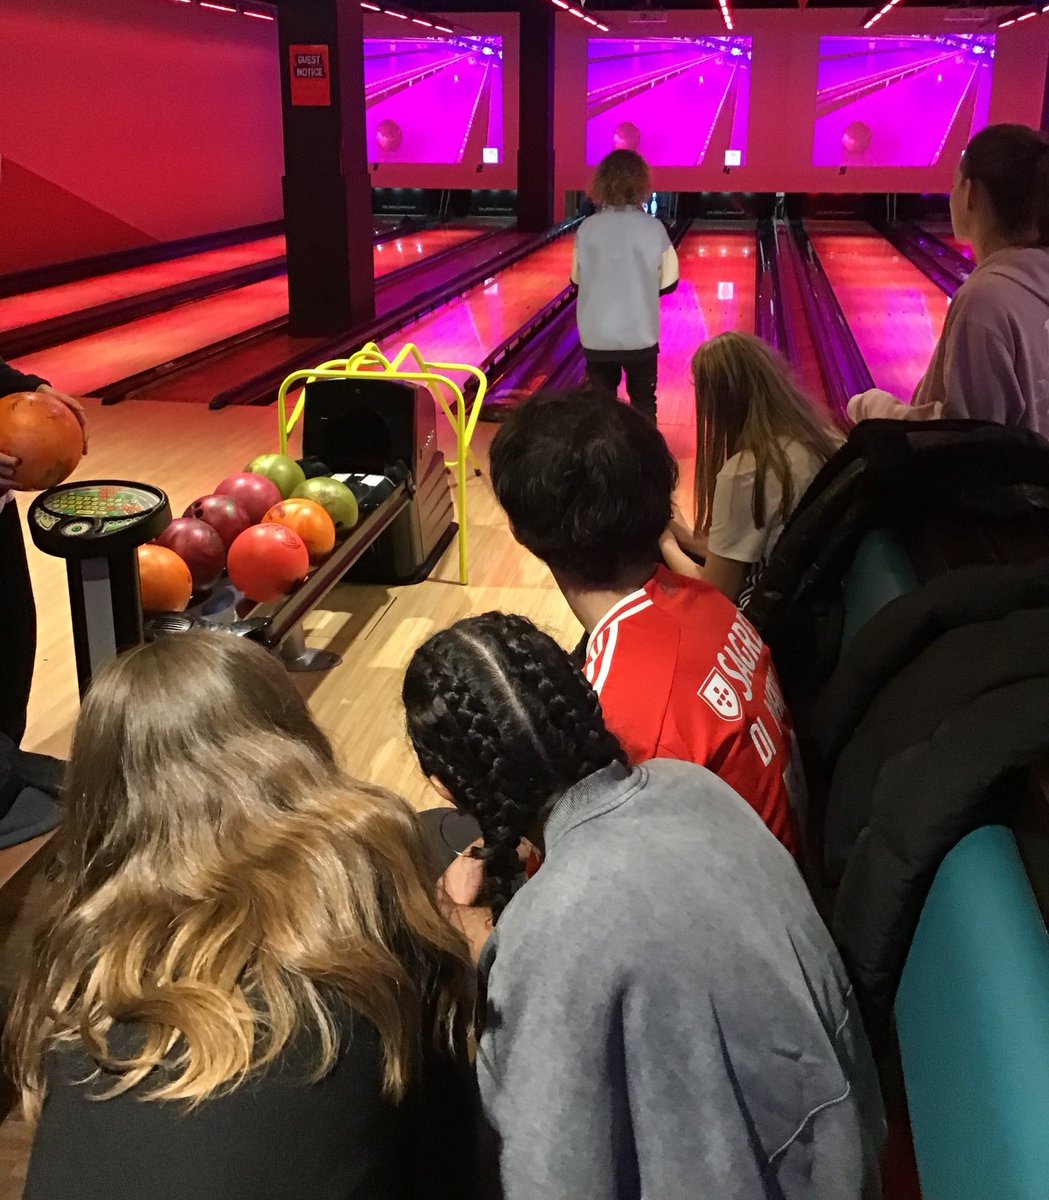 We had a great evening on Wednesday bowling with our International friends before a fish and chip supper! @HumberEdTrust #buildresiliencenotreliance 🎳